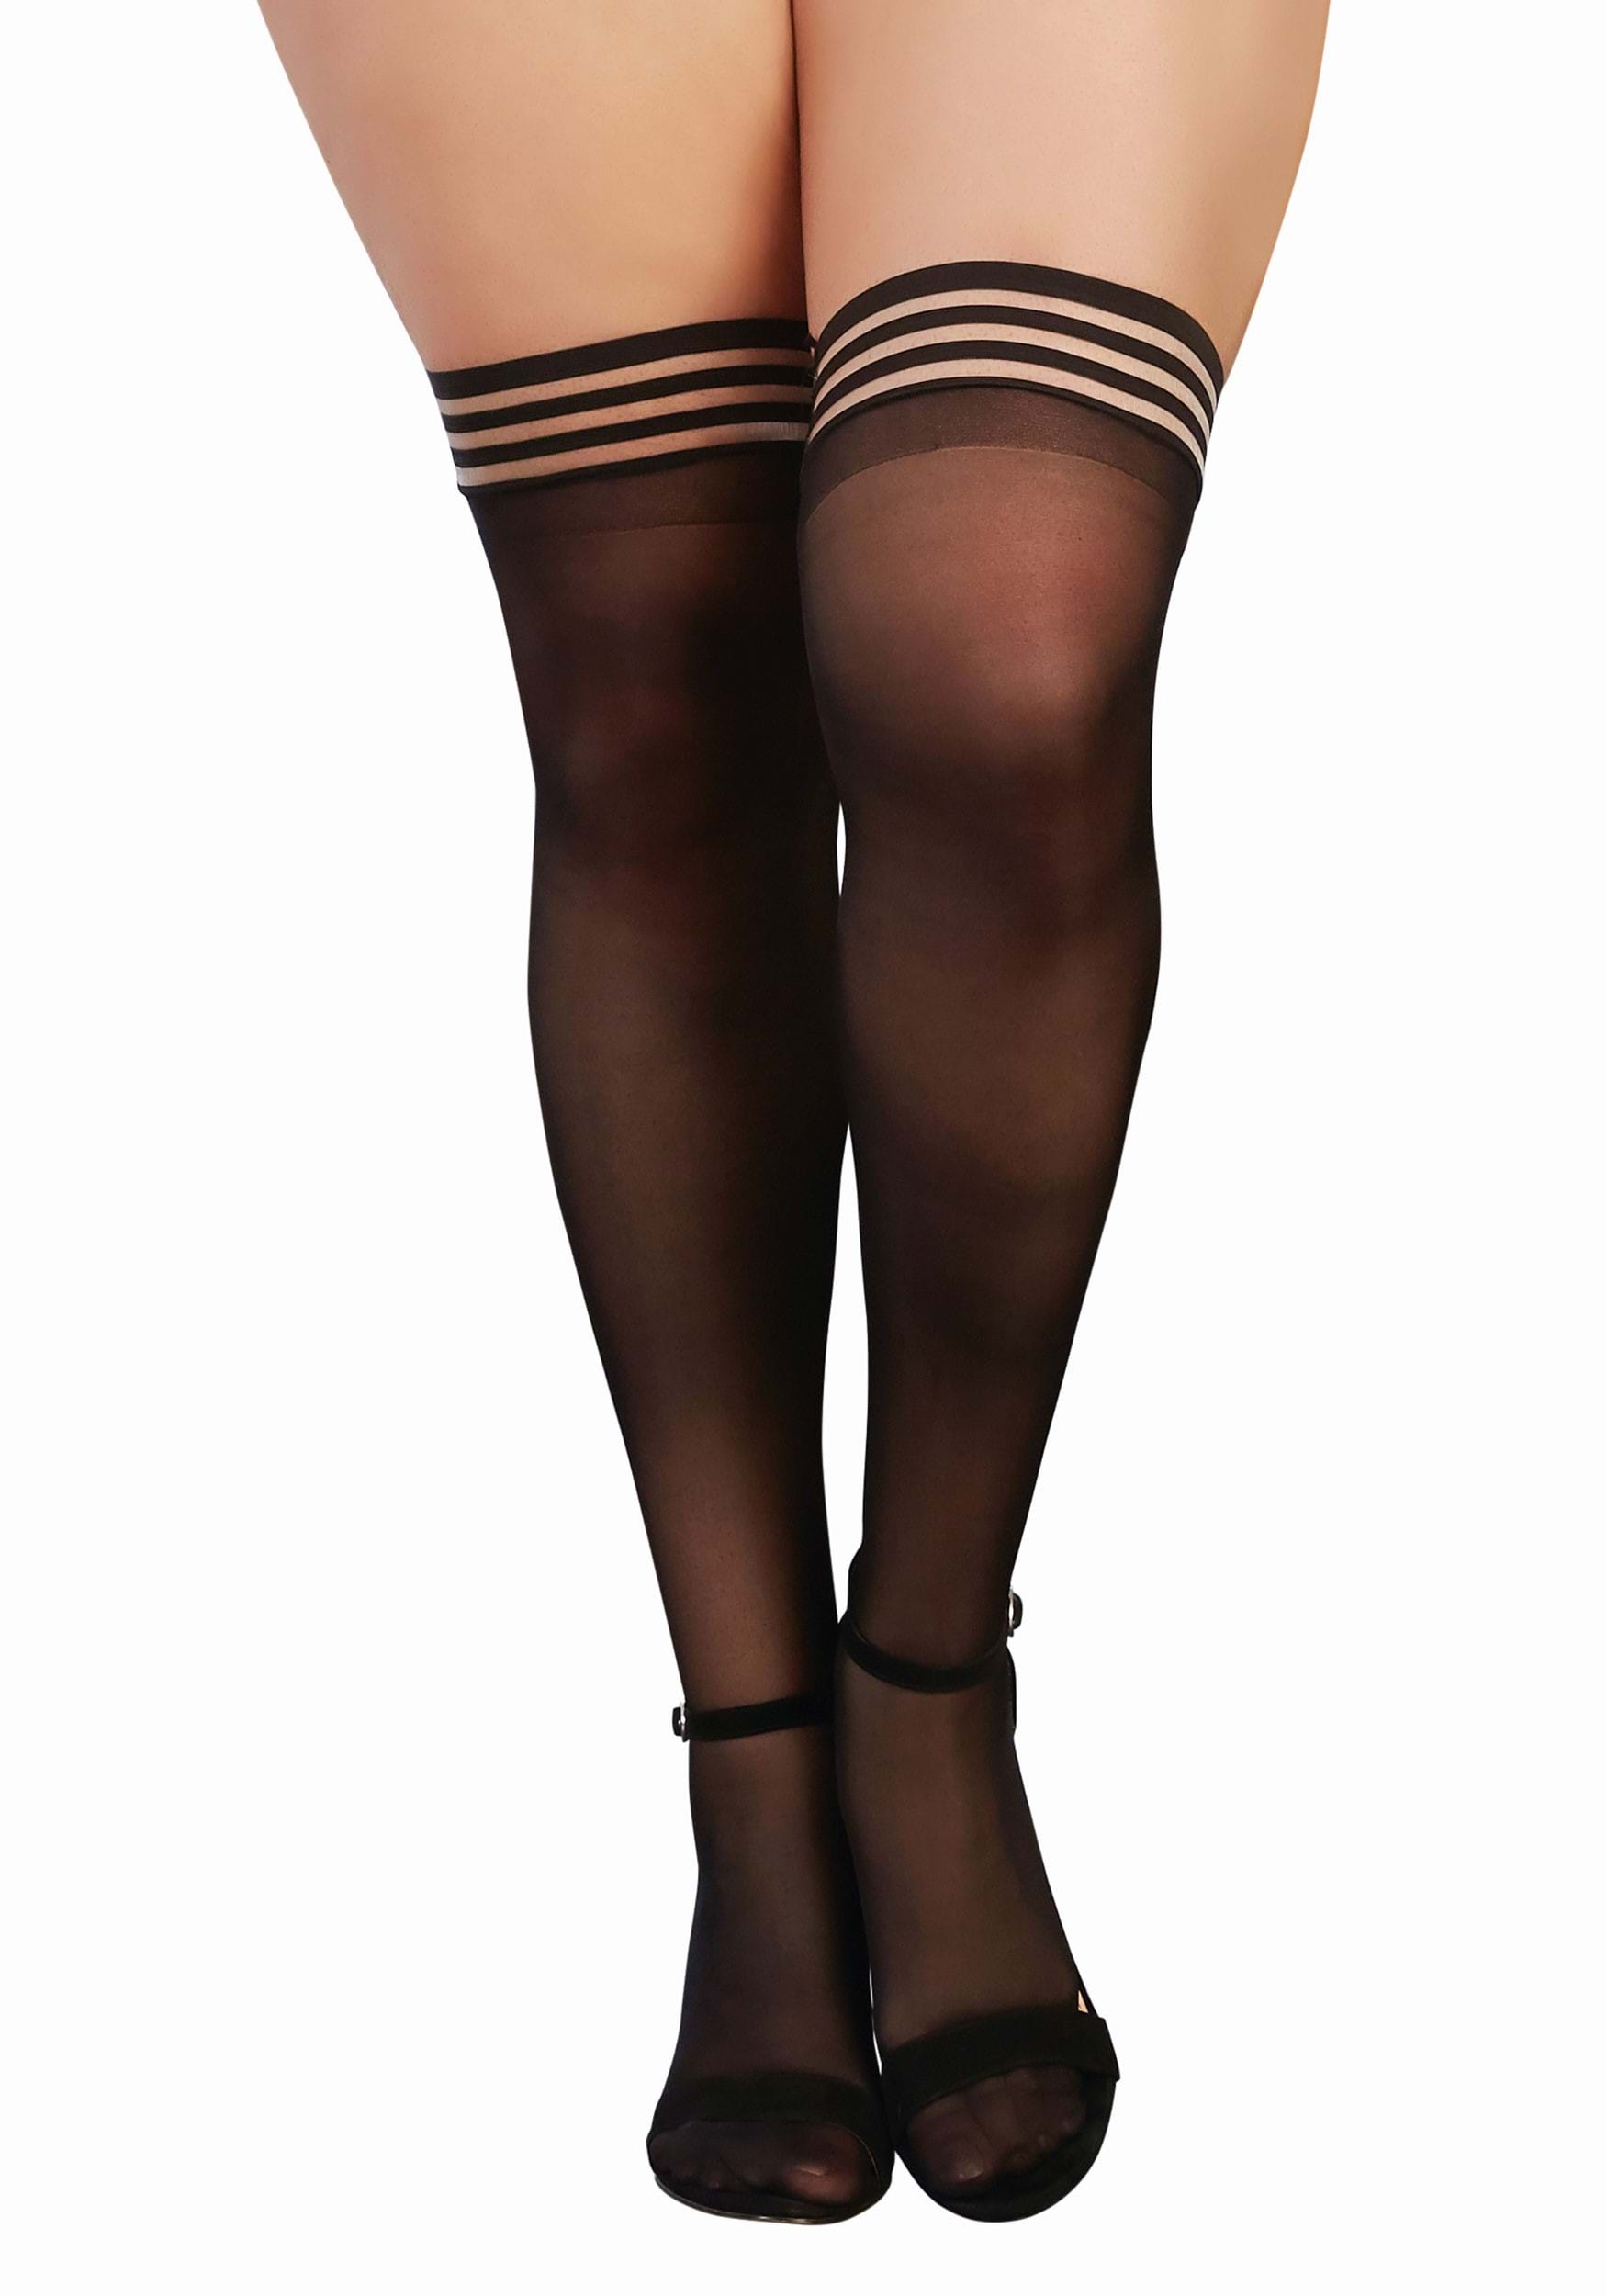 Women's Plus Size Black Sheer Thigh High Stockings with Striped